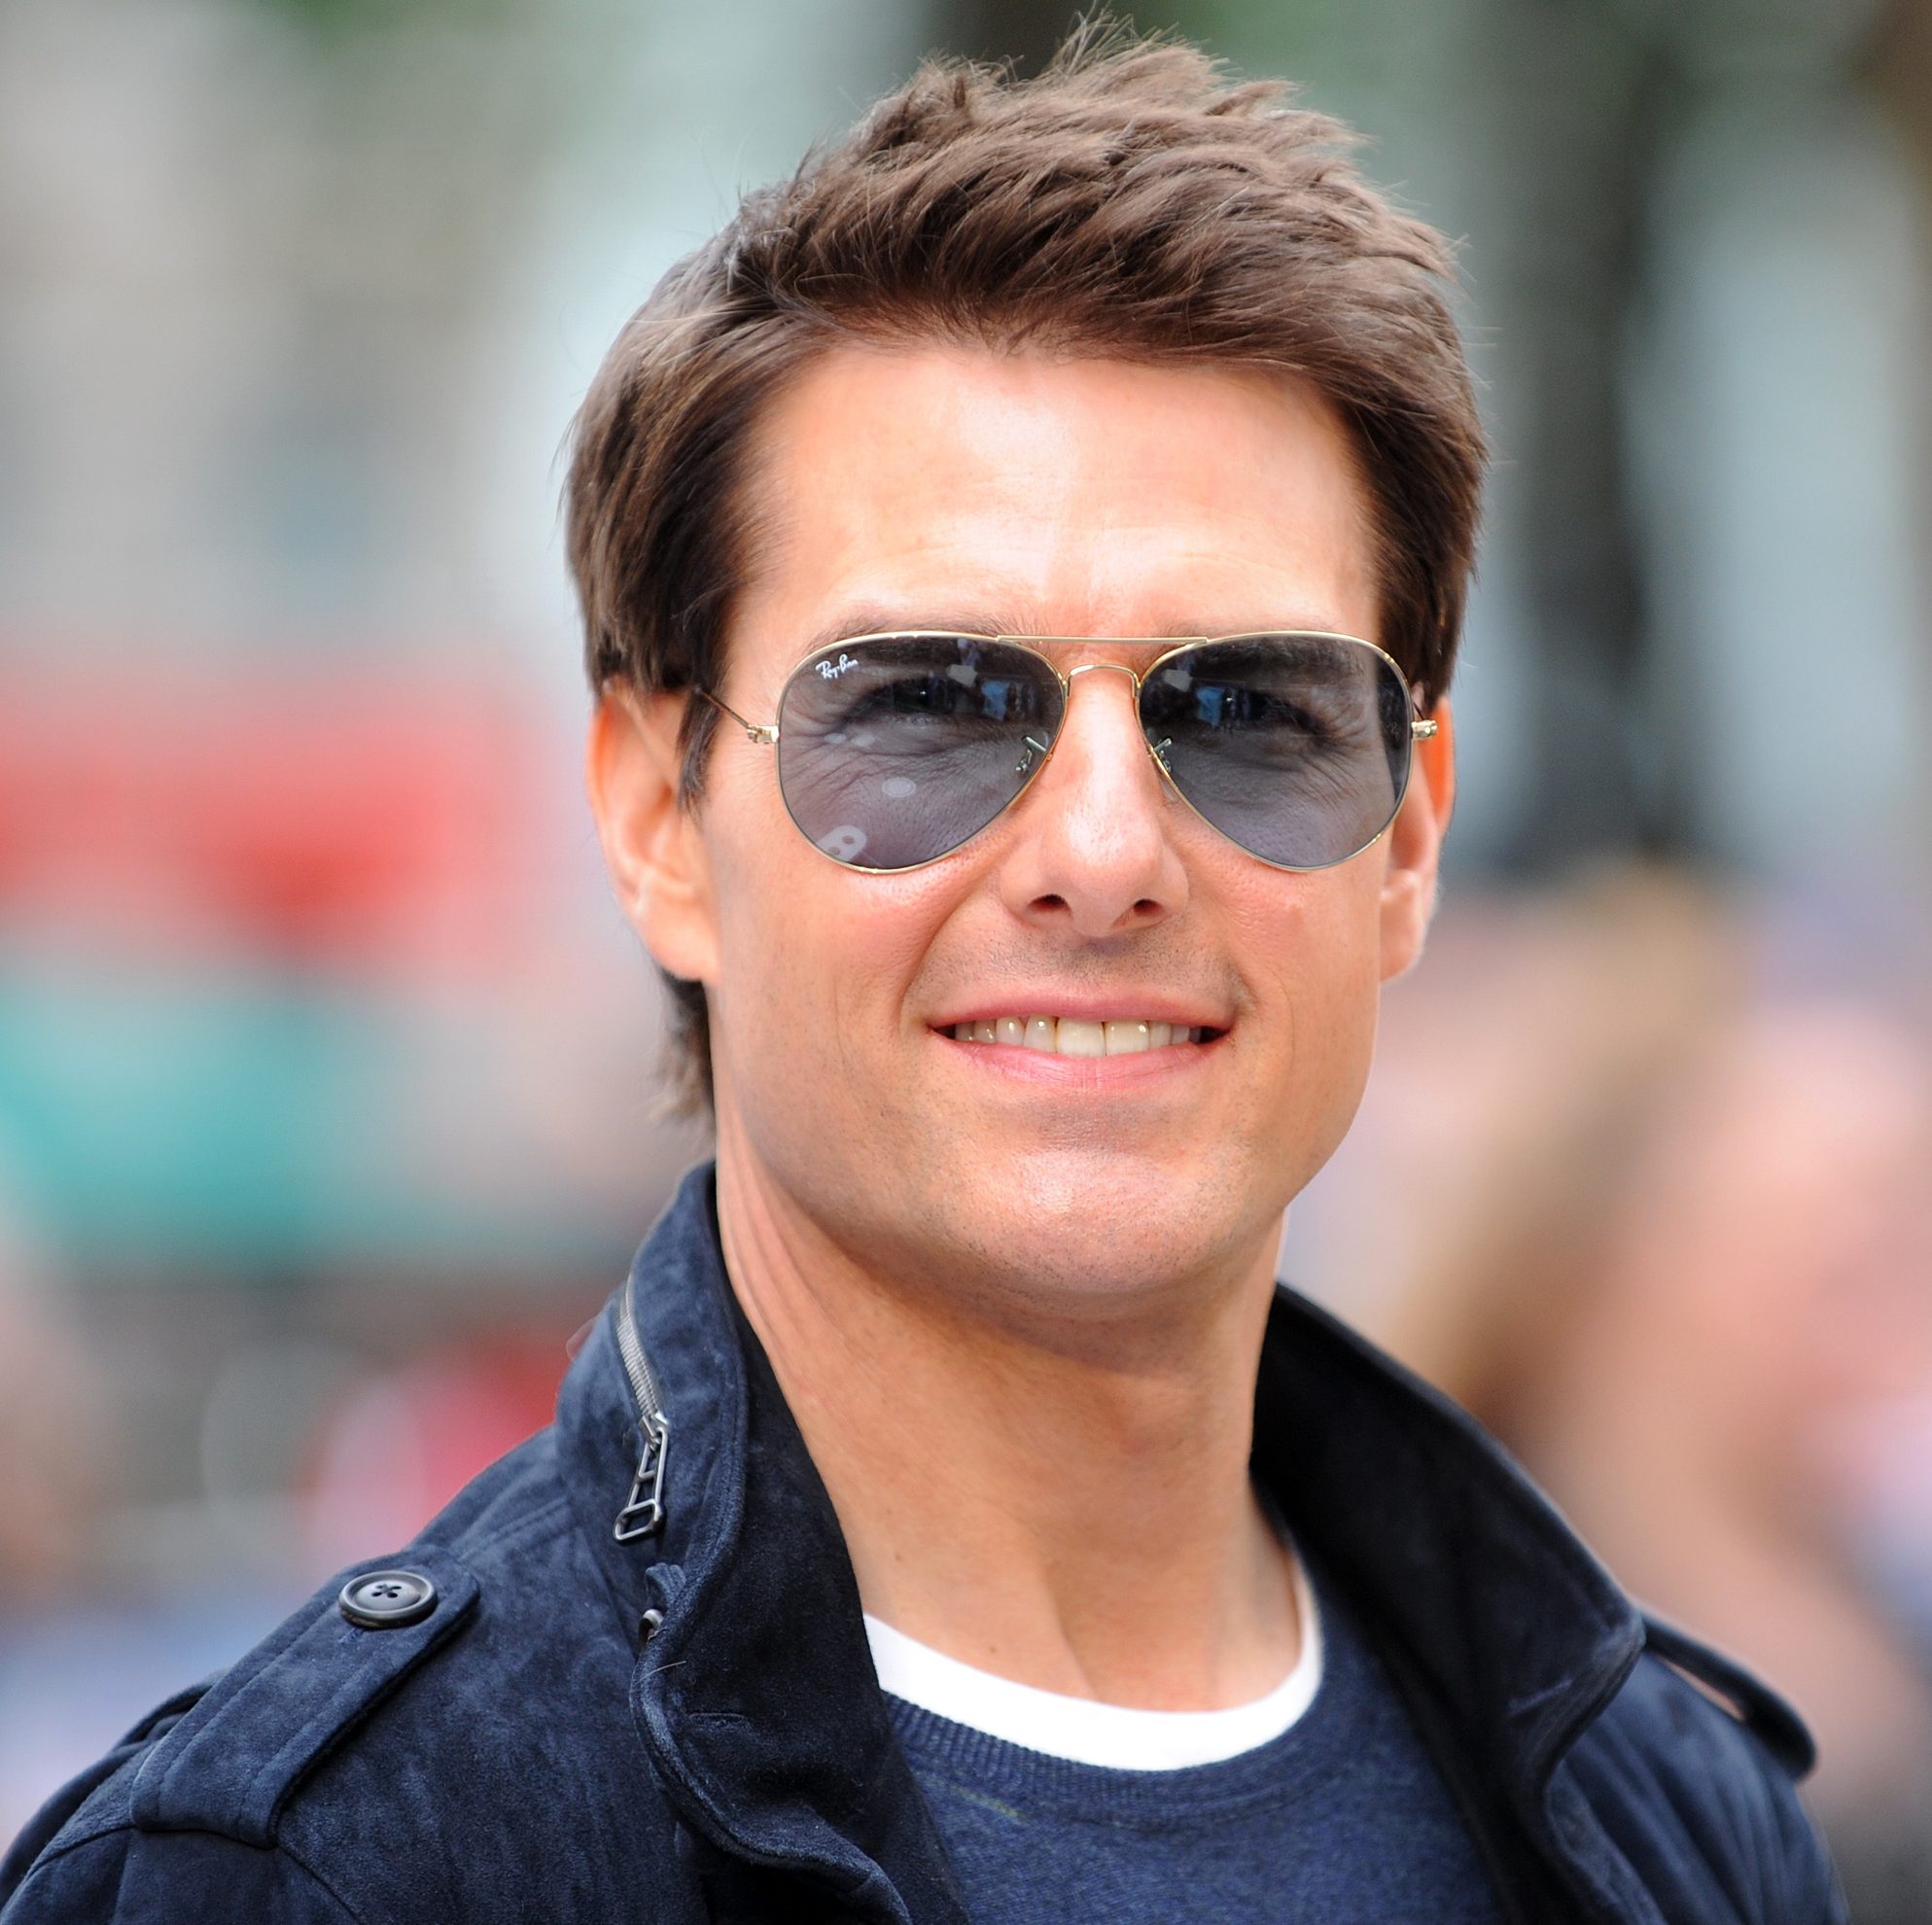 Tom Cruise | His Journey | Achievements | Personal Life